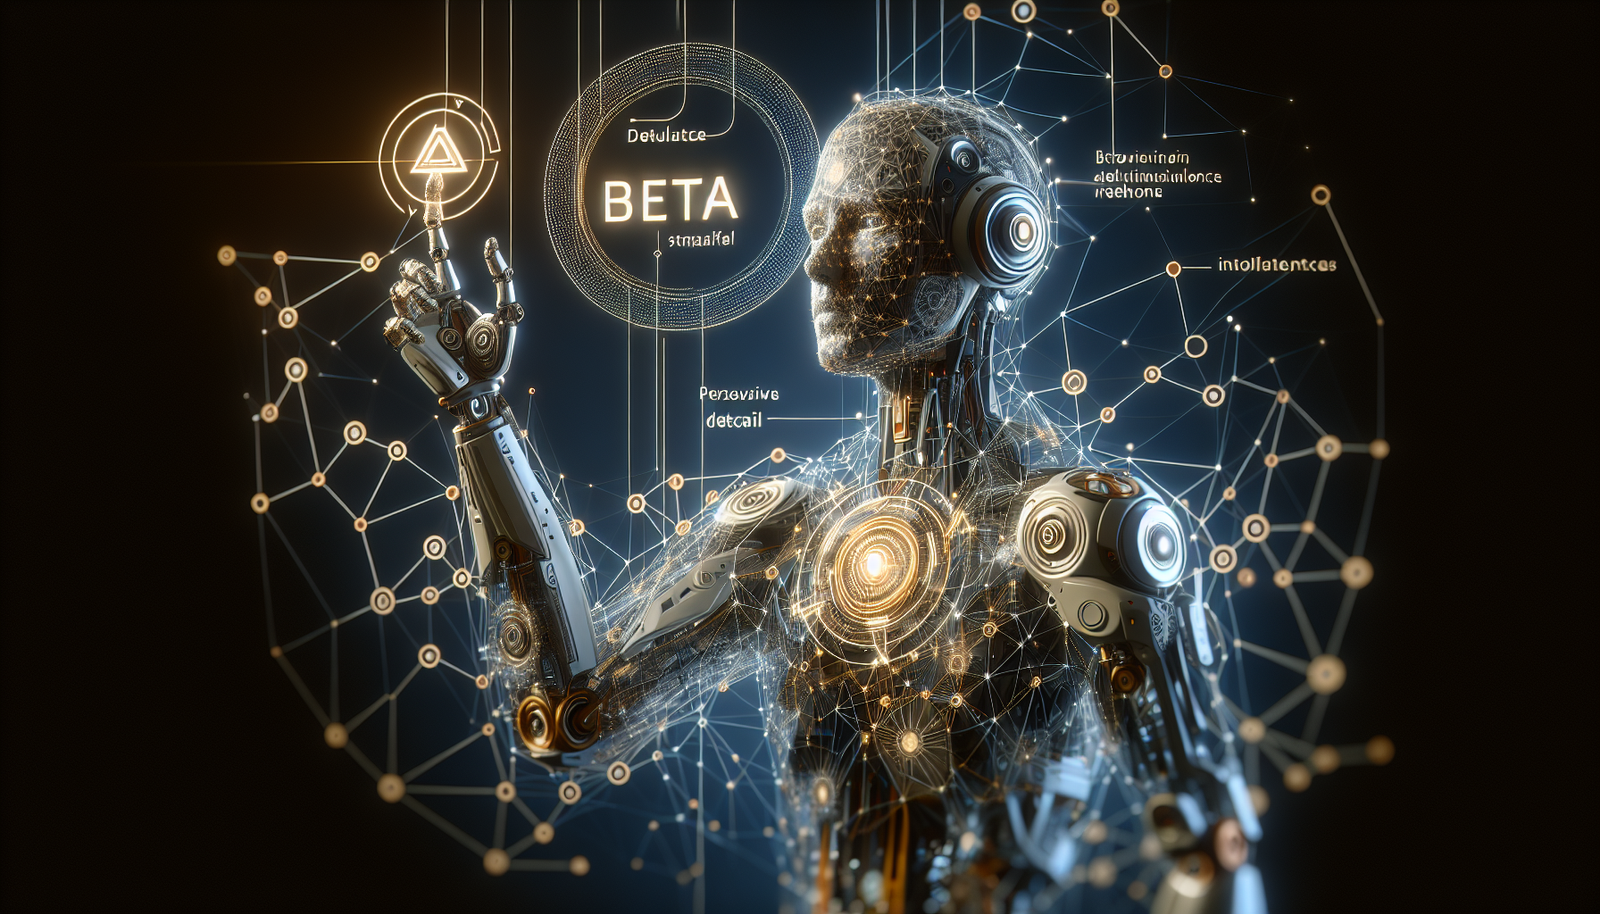 Exploring the Beta Character in AI Technology